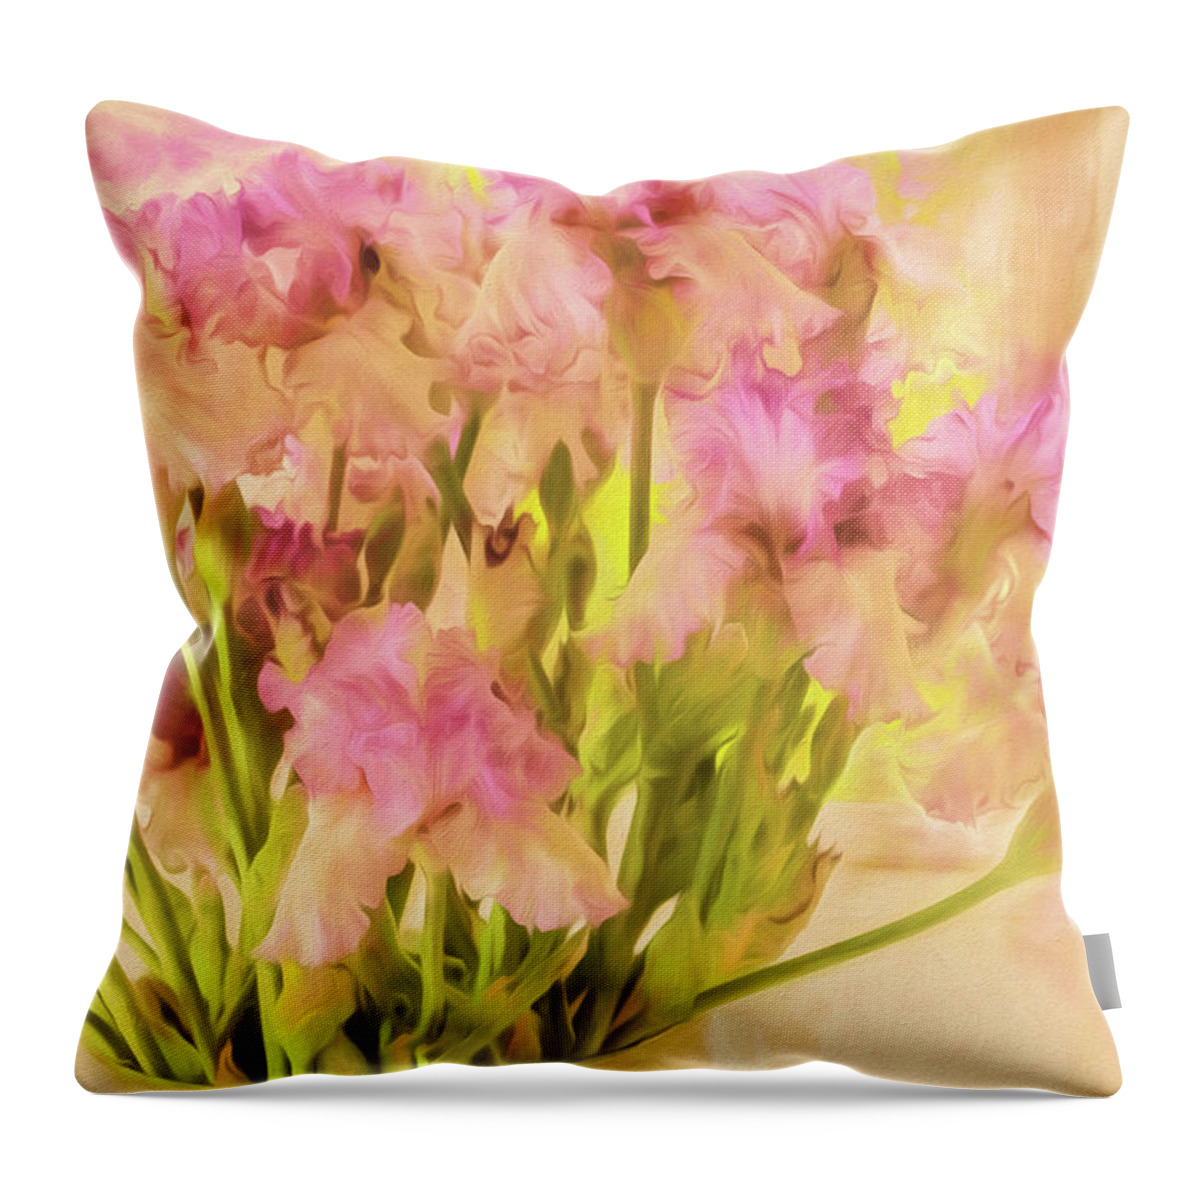 Watercolor Print Throw Pillow featuring the painting Watercolor Pot of Irises by Bonnie Bruno